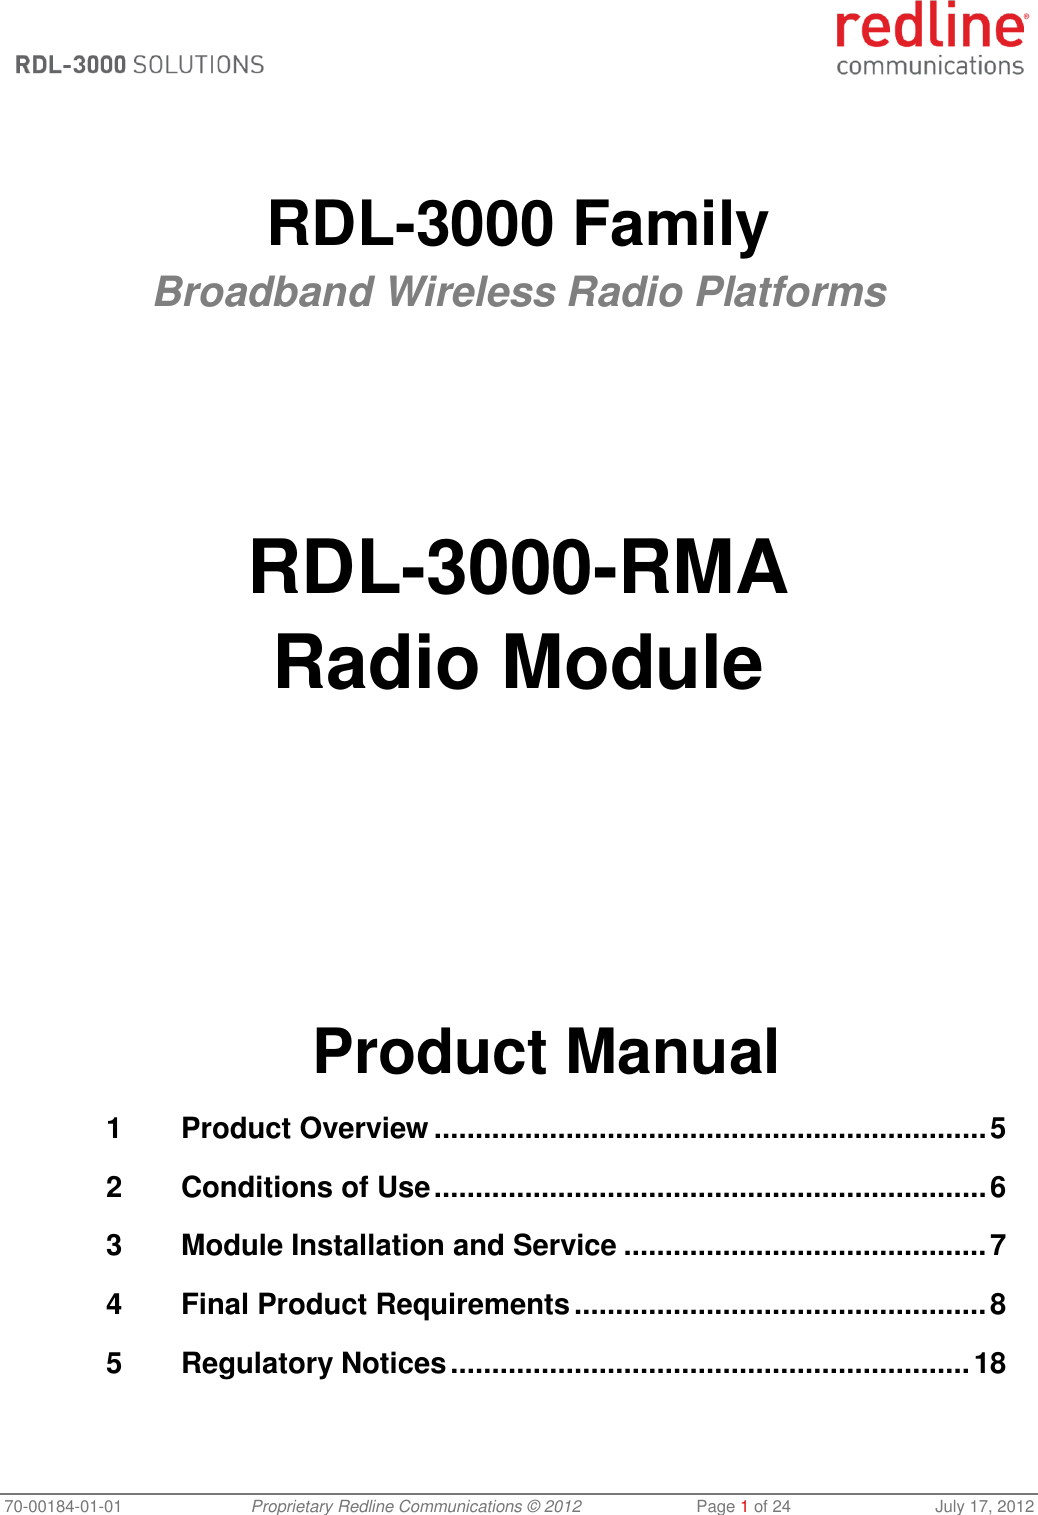  70-00184-01-01 Proprietary Redline Communications © 2012  Page 1 of 24  July 17, 2012    RDL-3000 Family Broadband Wireless Radio Platforms        RDL-3000-RMA Radio Module            Product Manual 1 Product Overview ................................................................... 5 2 Conditions of Use ................................................................... 6 3 Module Installation and Service ............................................ 7 4 Final Product Requirements .................................................. 8 5 Regulatory Notices ............................................................... 18 